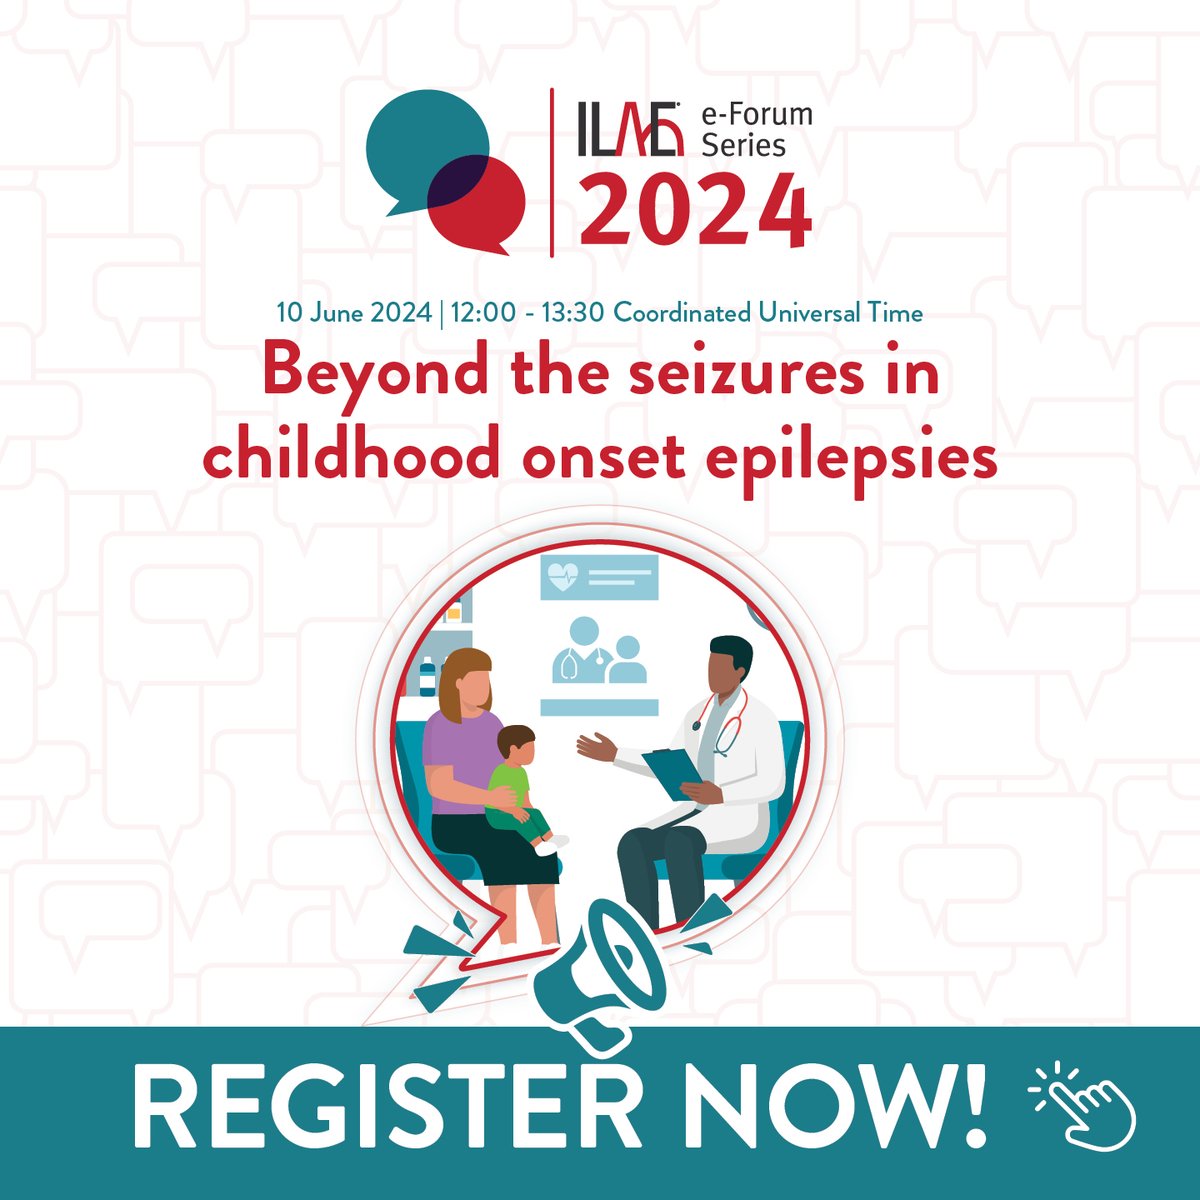 Registration is open for the #ILAE e-Forum: Beyond the seizures in childhood onset #epilepsies, taking place on 10 June 2024! This session features #epilepsy experts Elaine Wirrell, @KetteValente & J. Helen Cross. Free registration: ilae.org/eforum-1